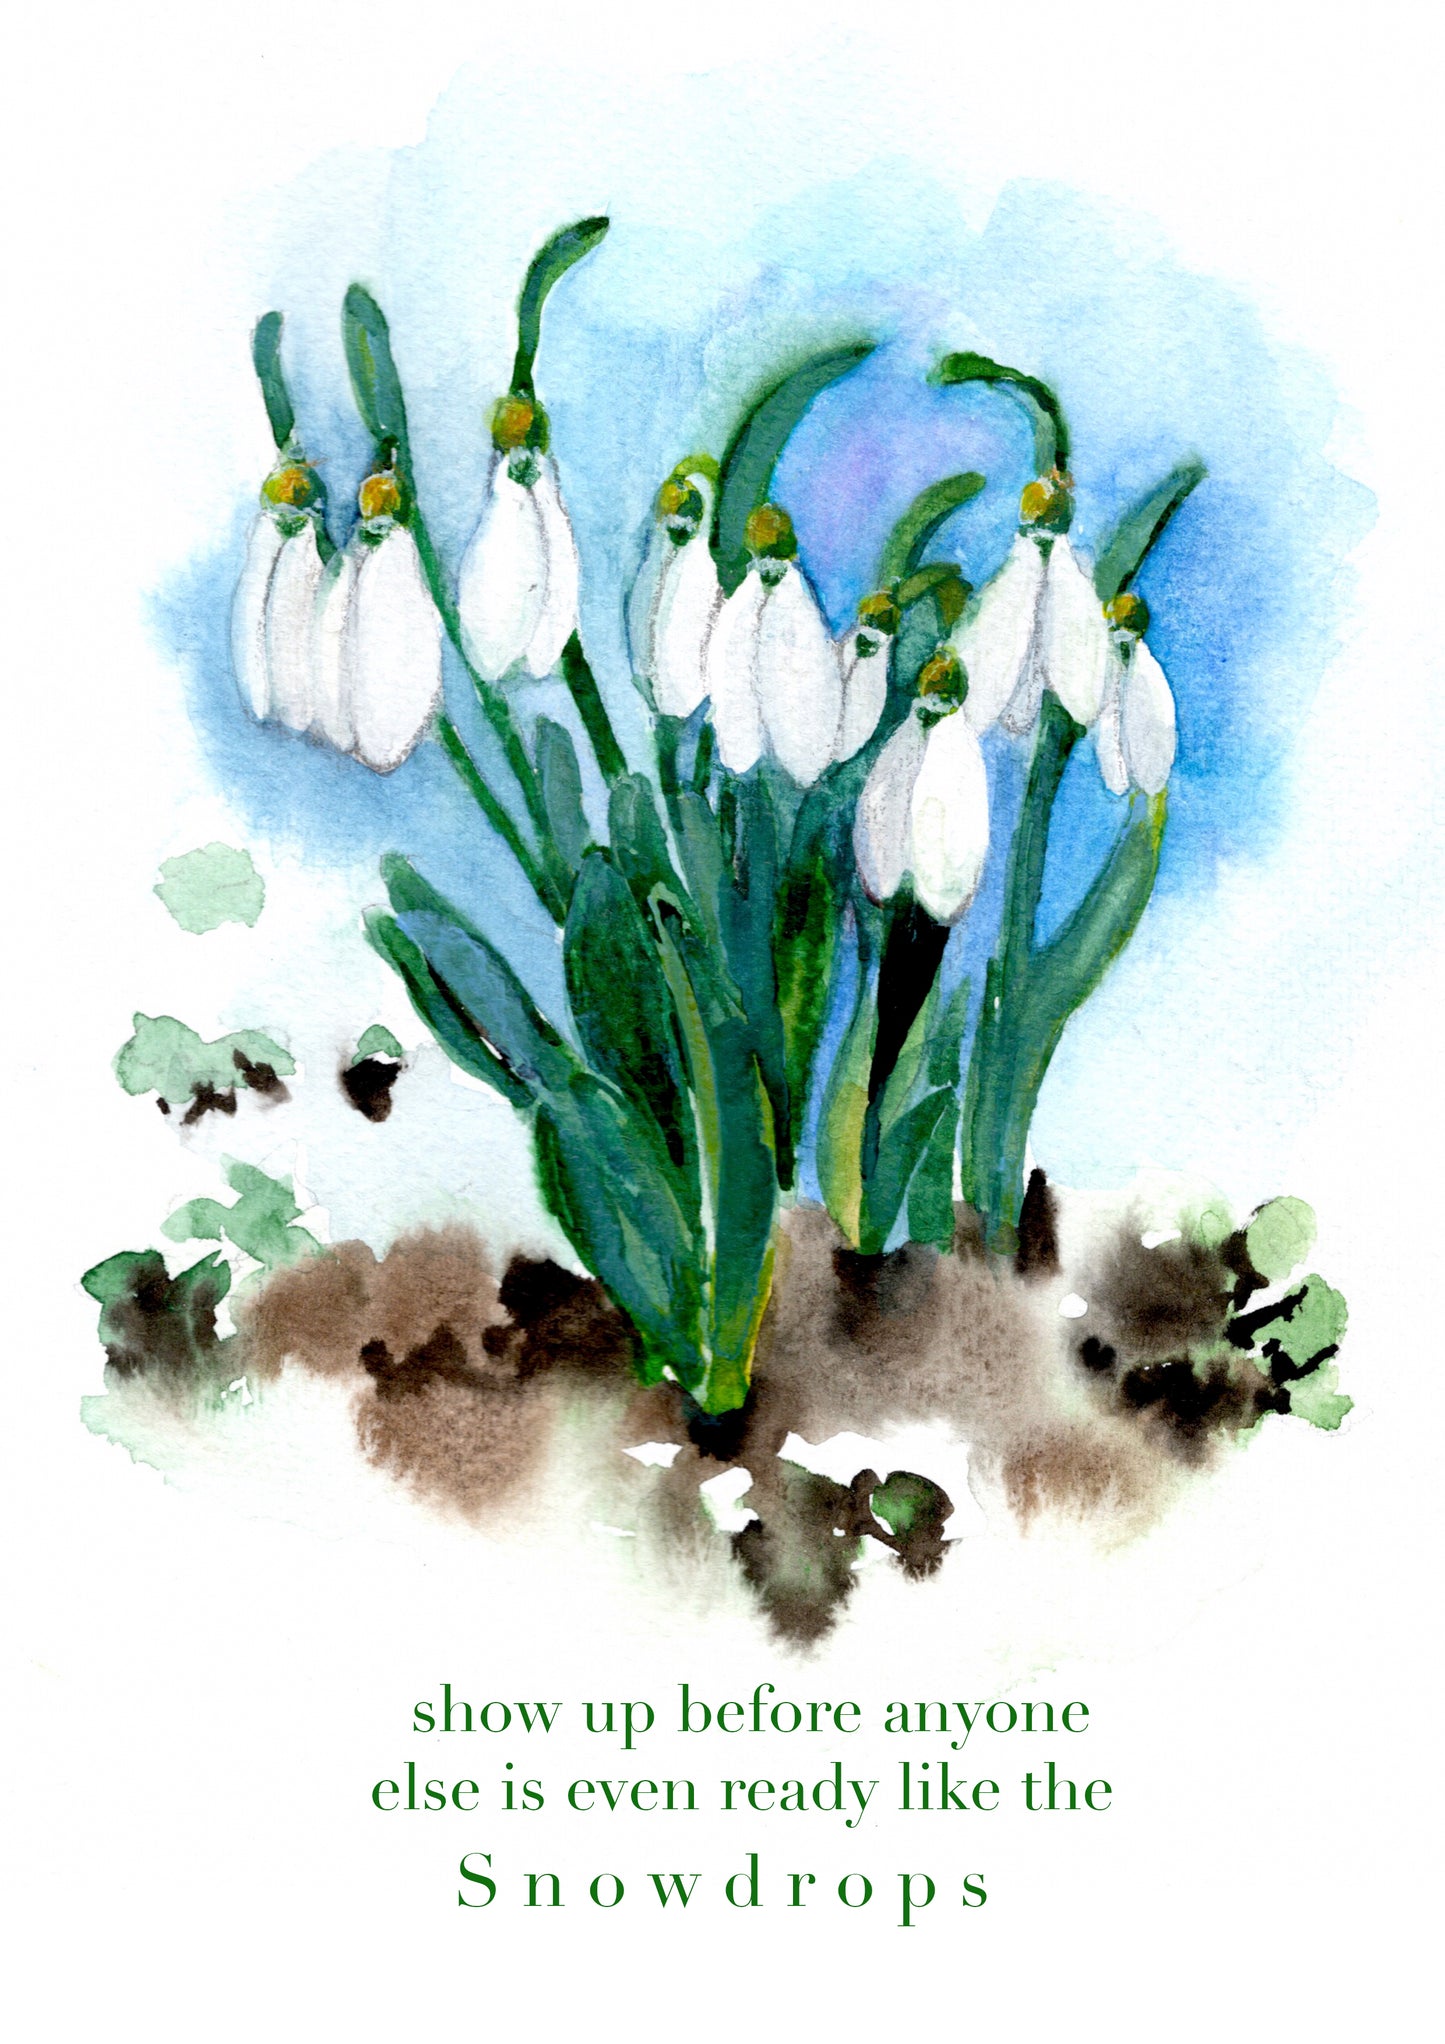 T-Shirt "Show up before anyone else is ready like the snowdrops"